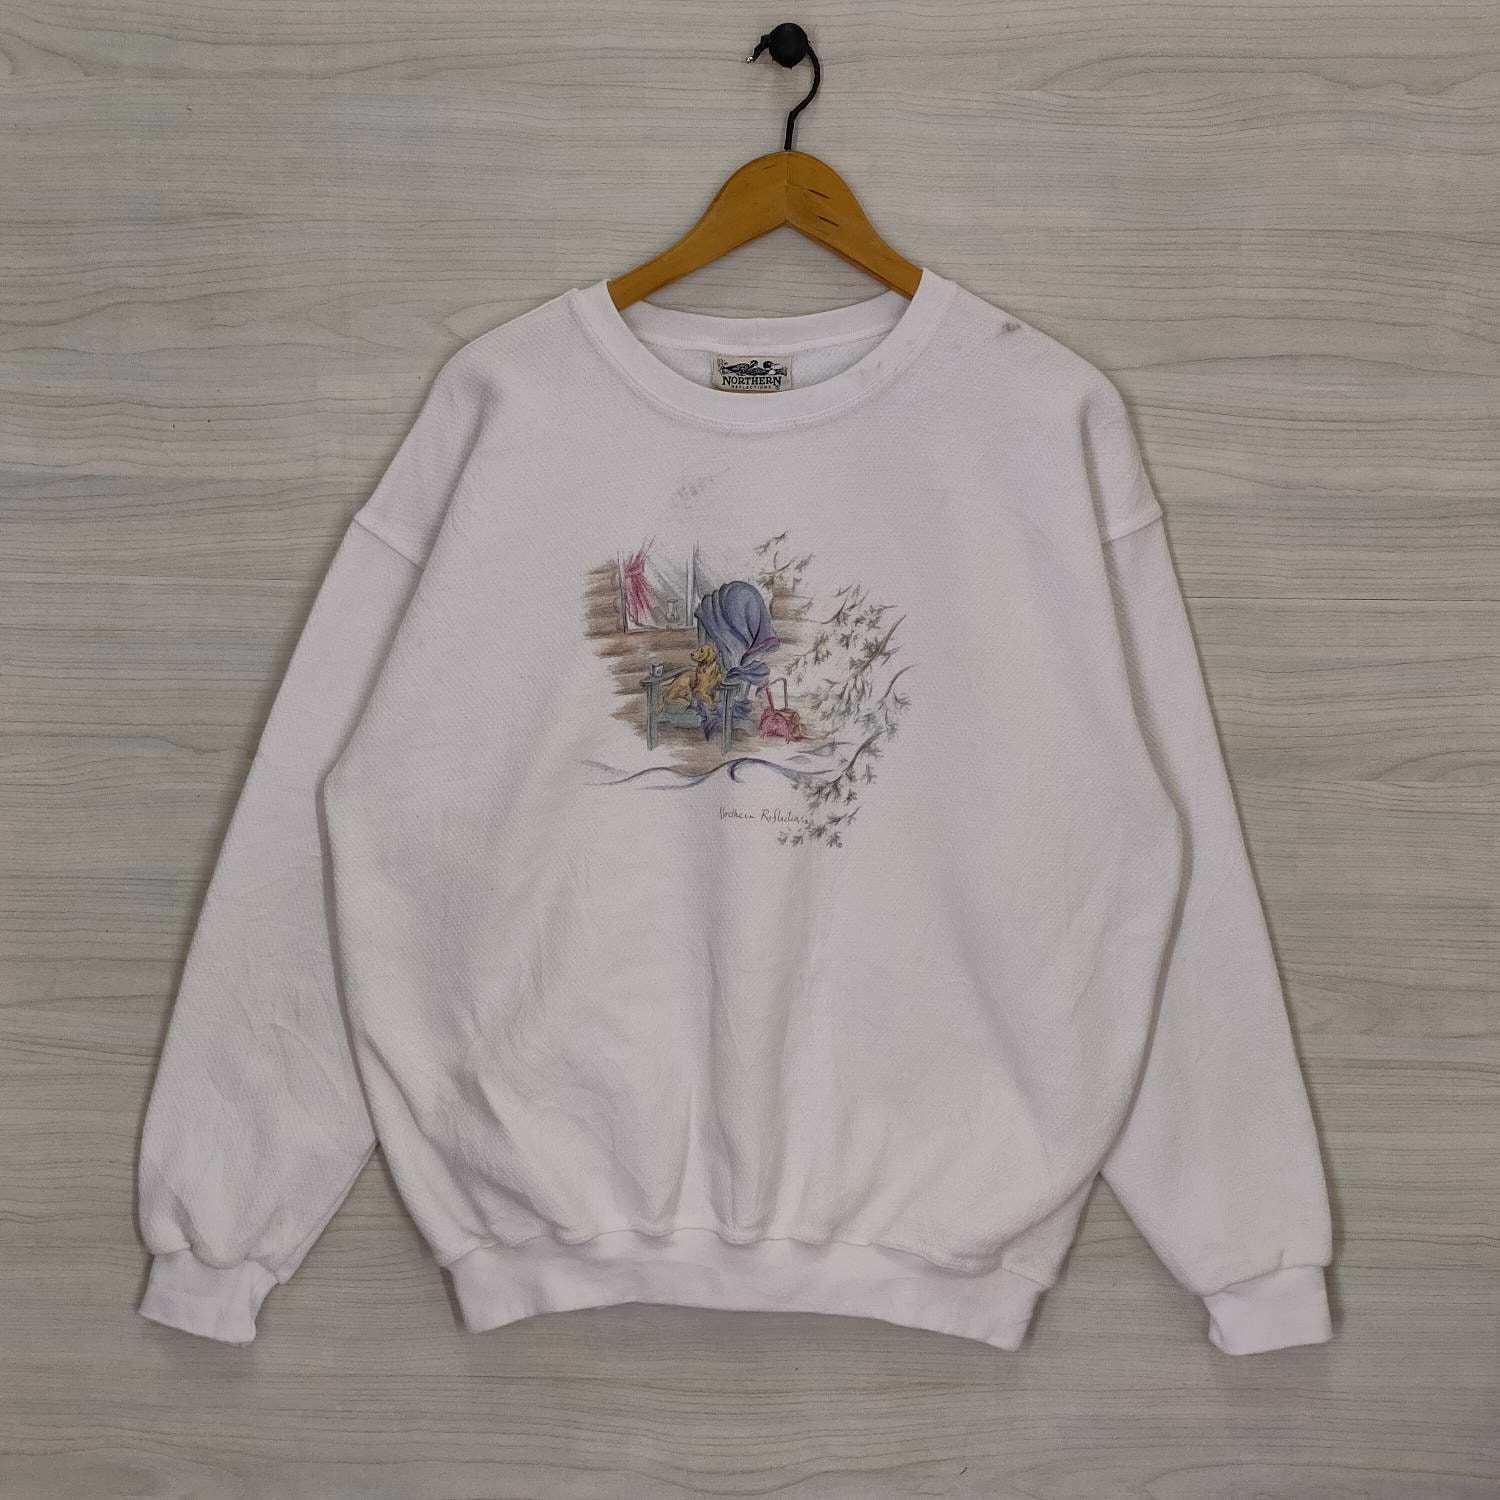 NORTHERN Reflections Crewneck Large Vintage 90s Animal Graphic Sweatshirt  Jumper Pullover, Dog Sweater White Size L -  Canada